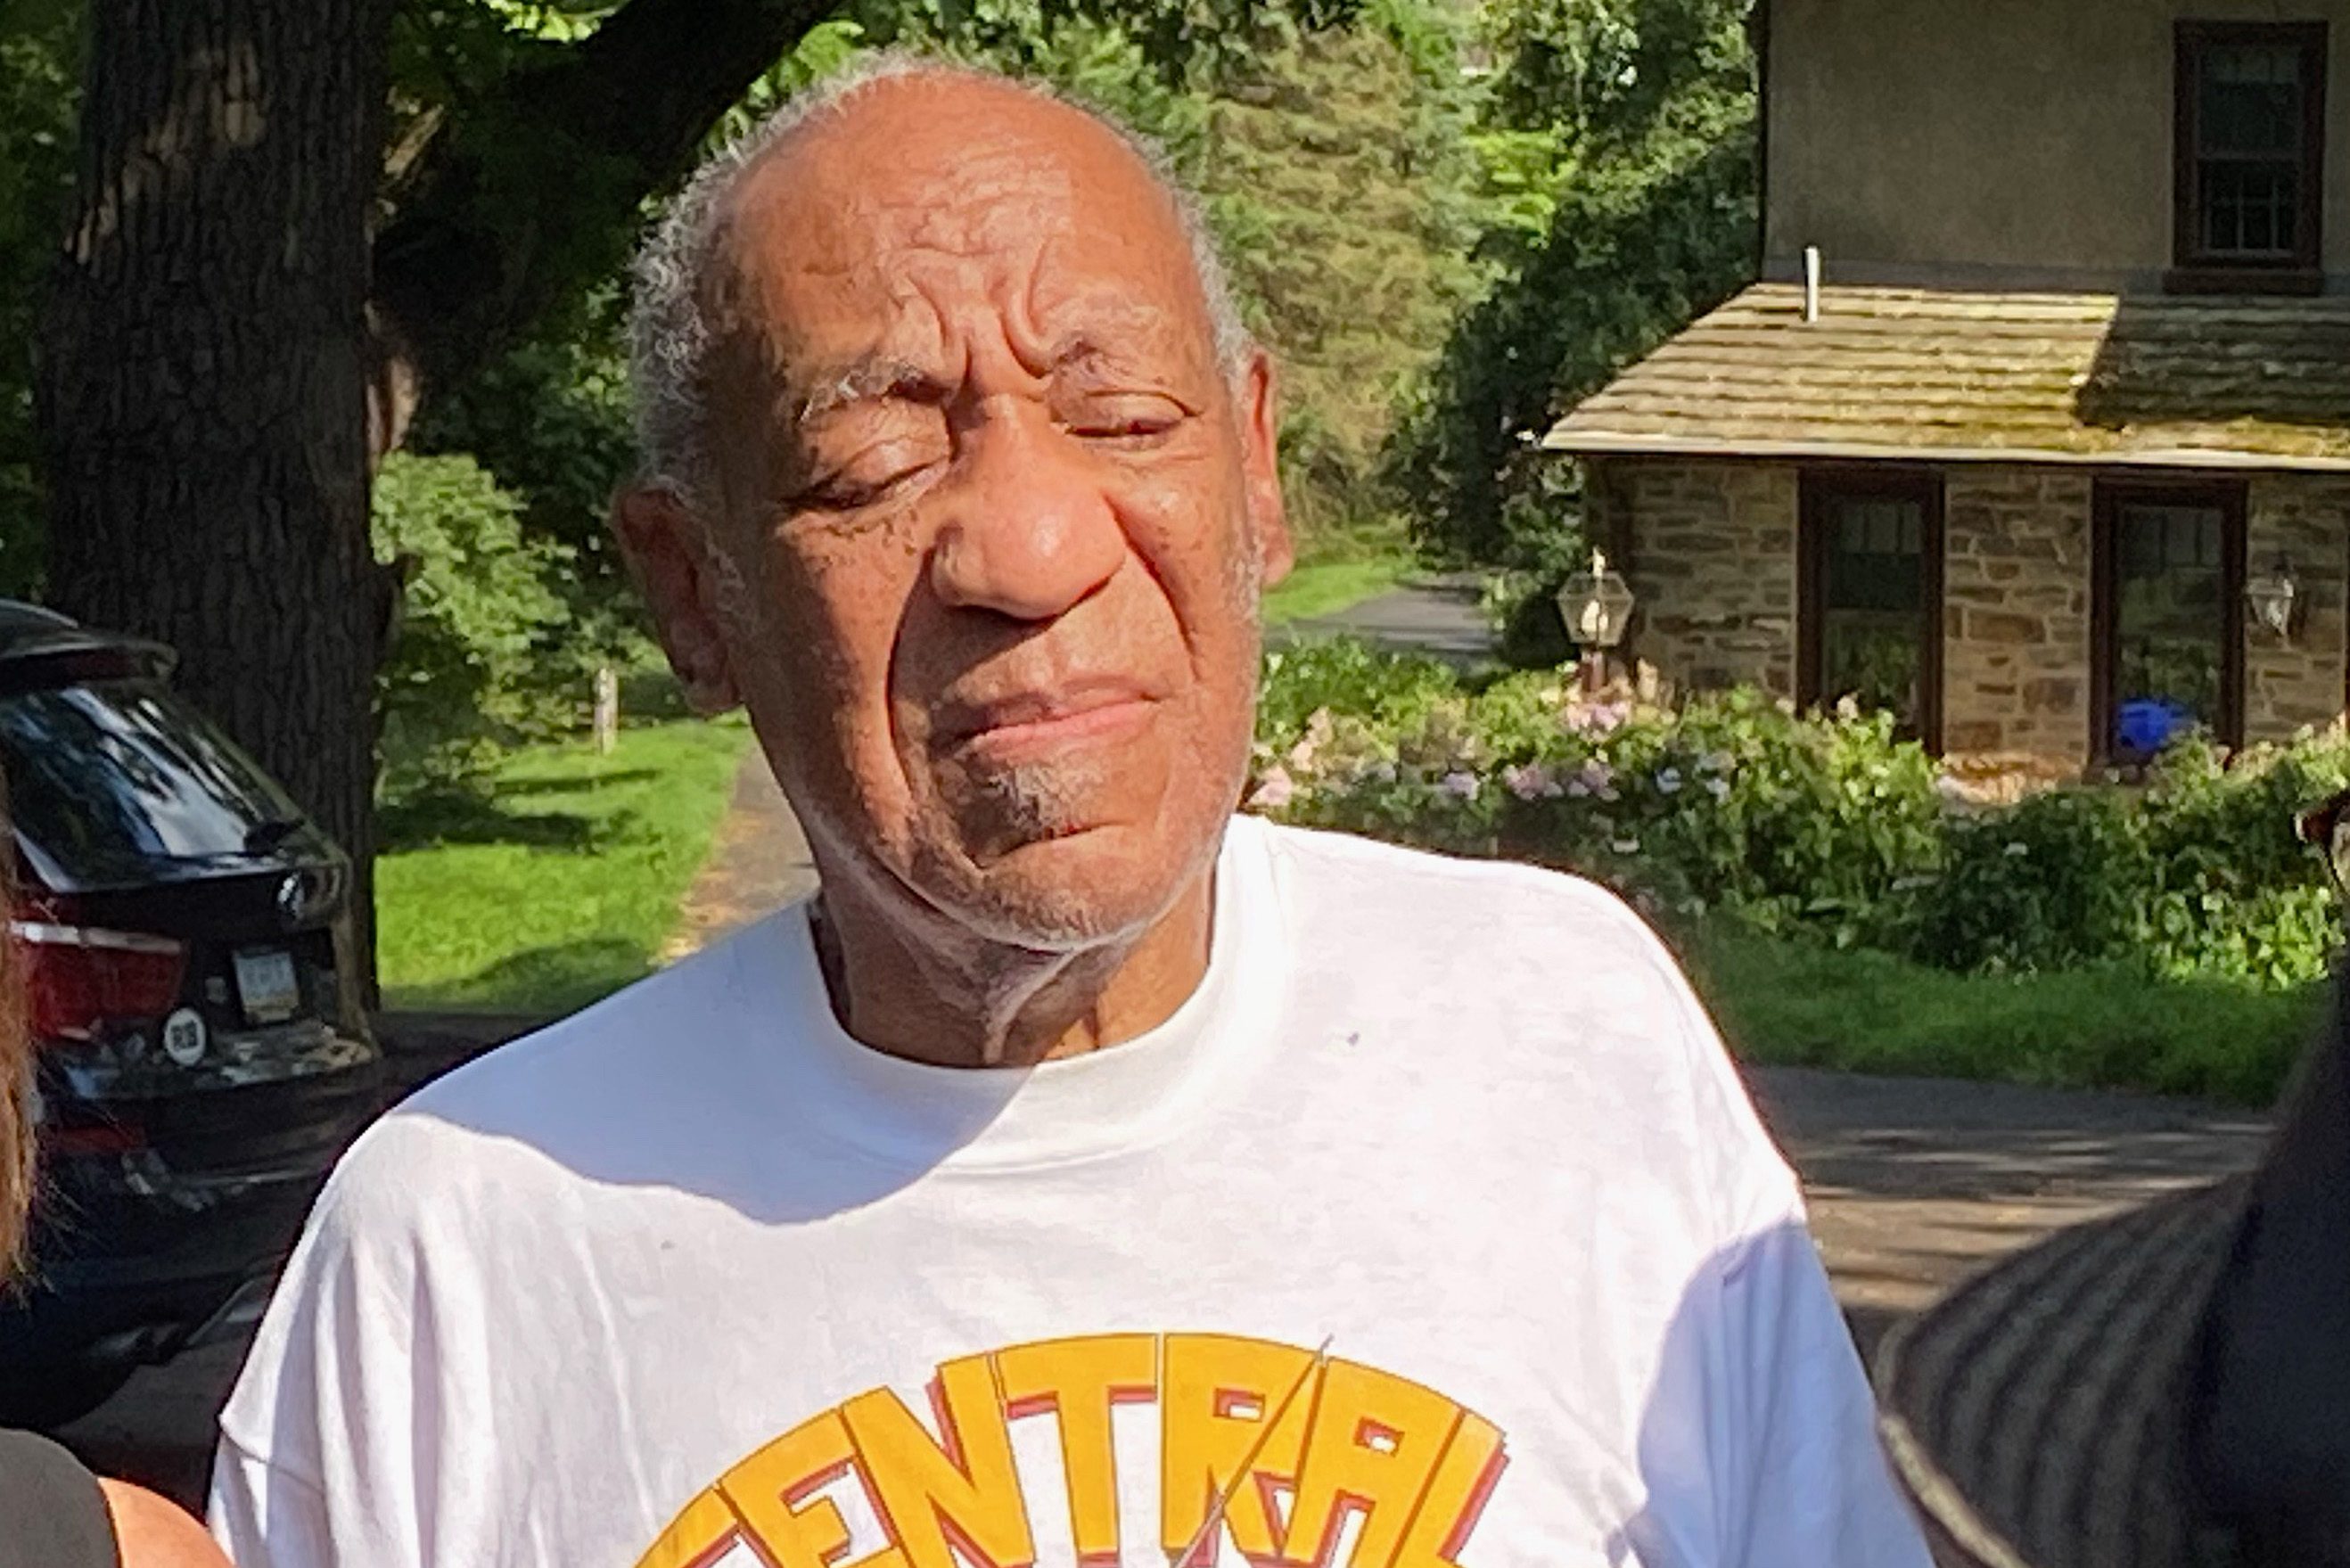 Bill Cosby speaks to reporters outside of his home after being released from prison on June 30, 2021.